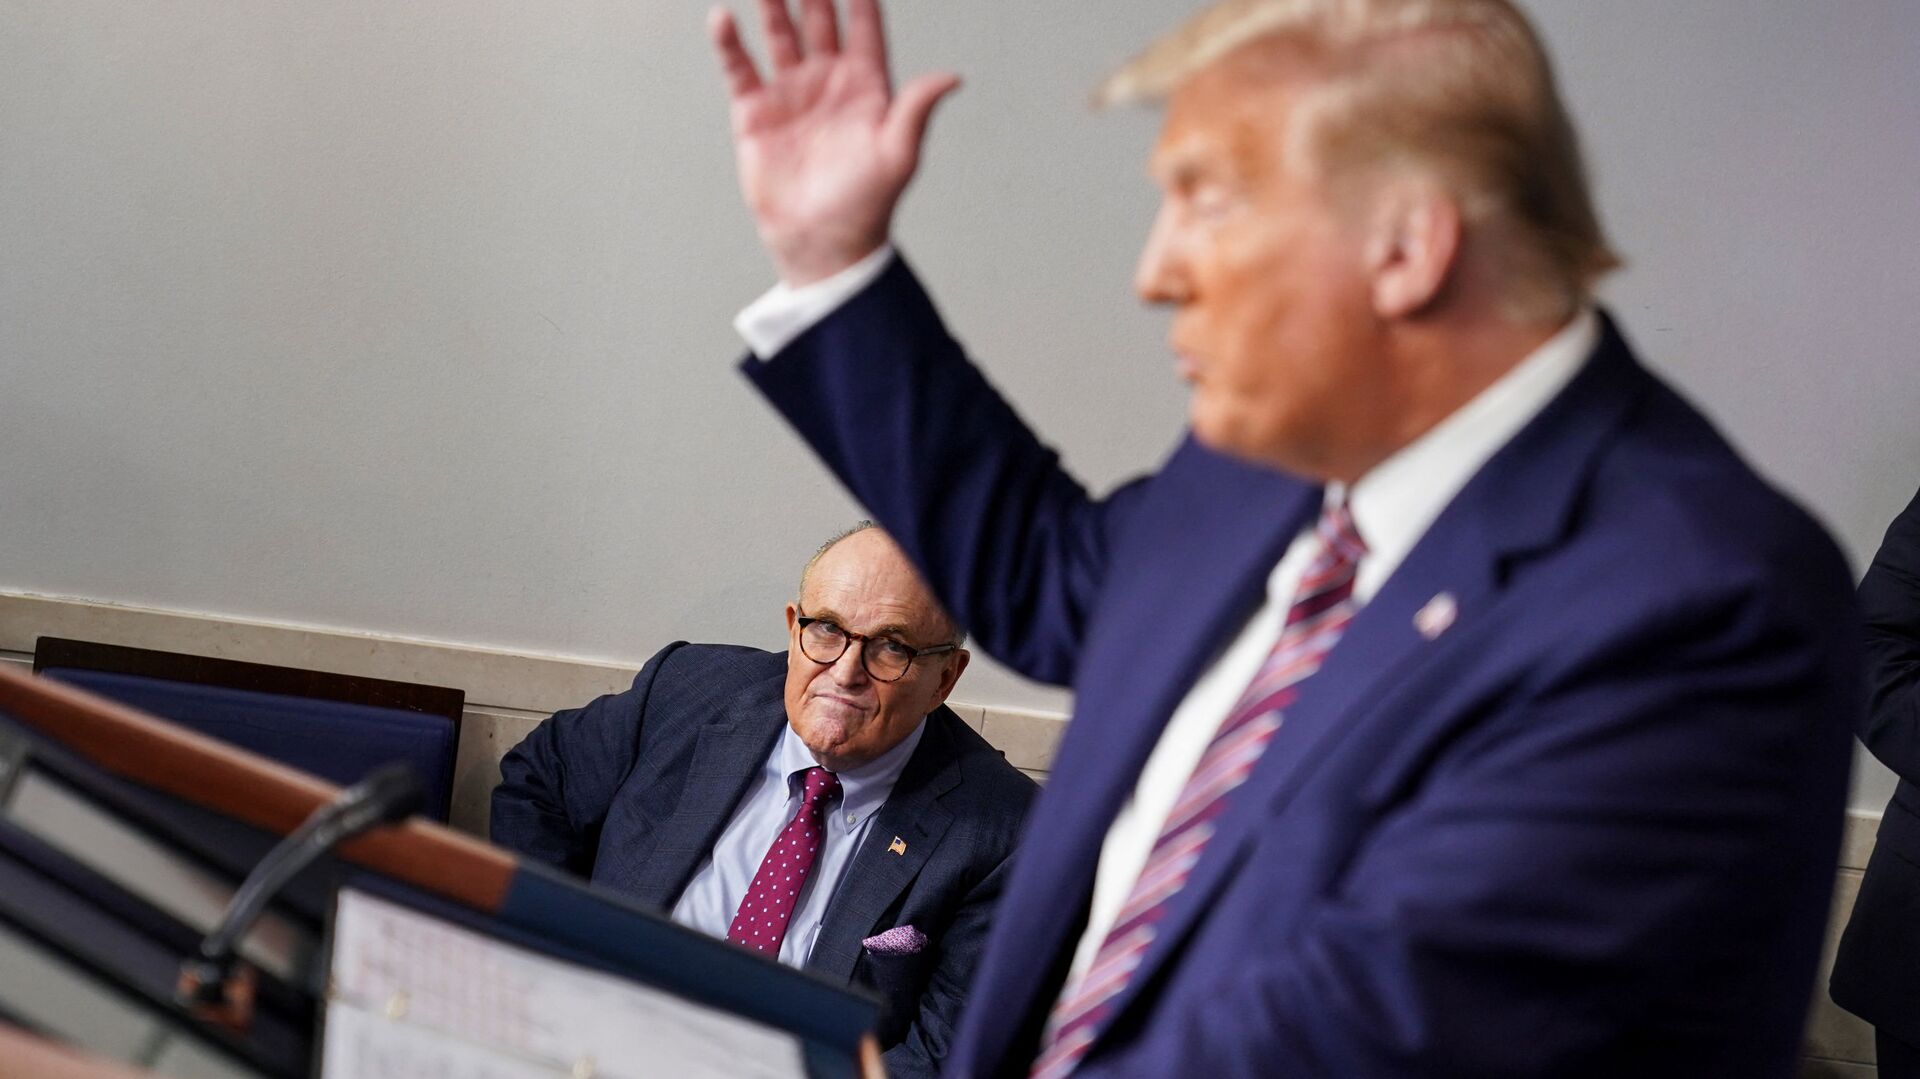 Former New York Mayor Rudy Giuliani listens as U.S. President Donald Trump speaks during a news conference in the Briefing Room of the White House on September 27, 2020 in Washington, DC. - Sputnik International, 1920, 25.02.2021